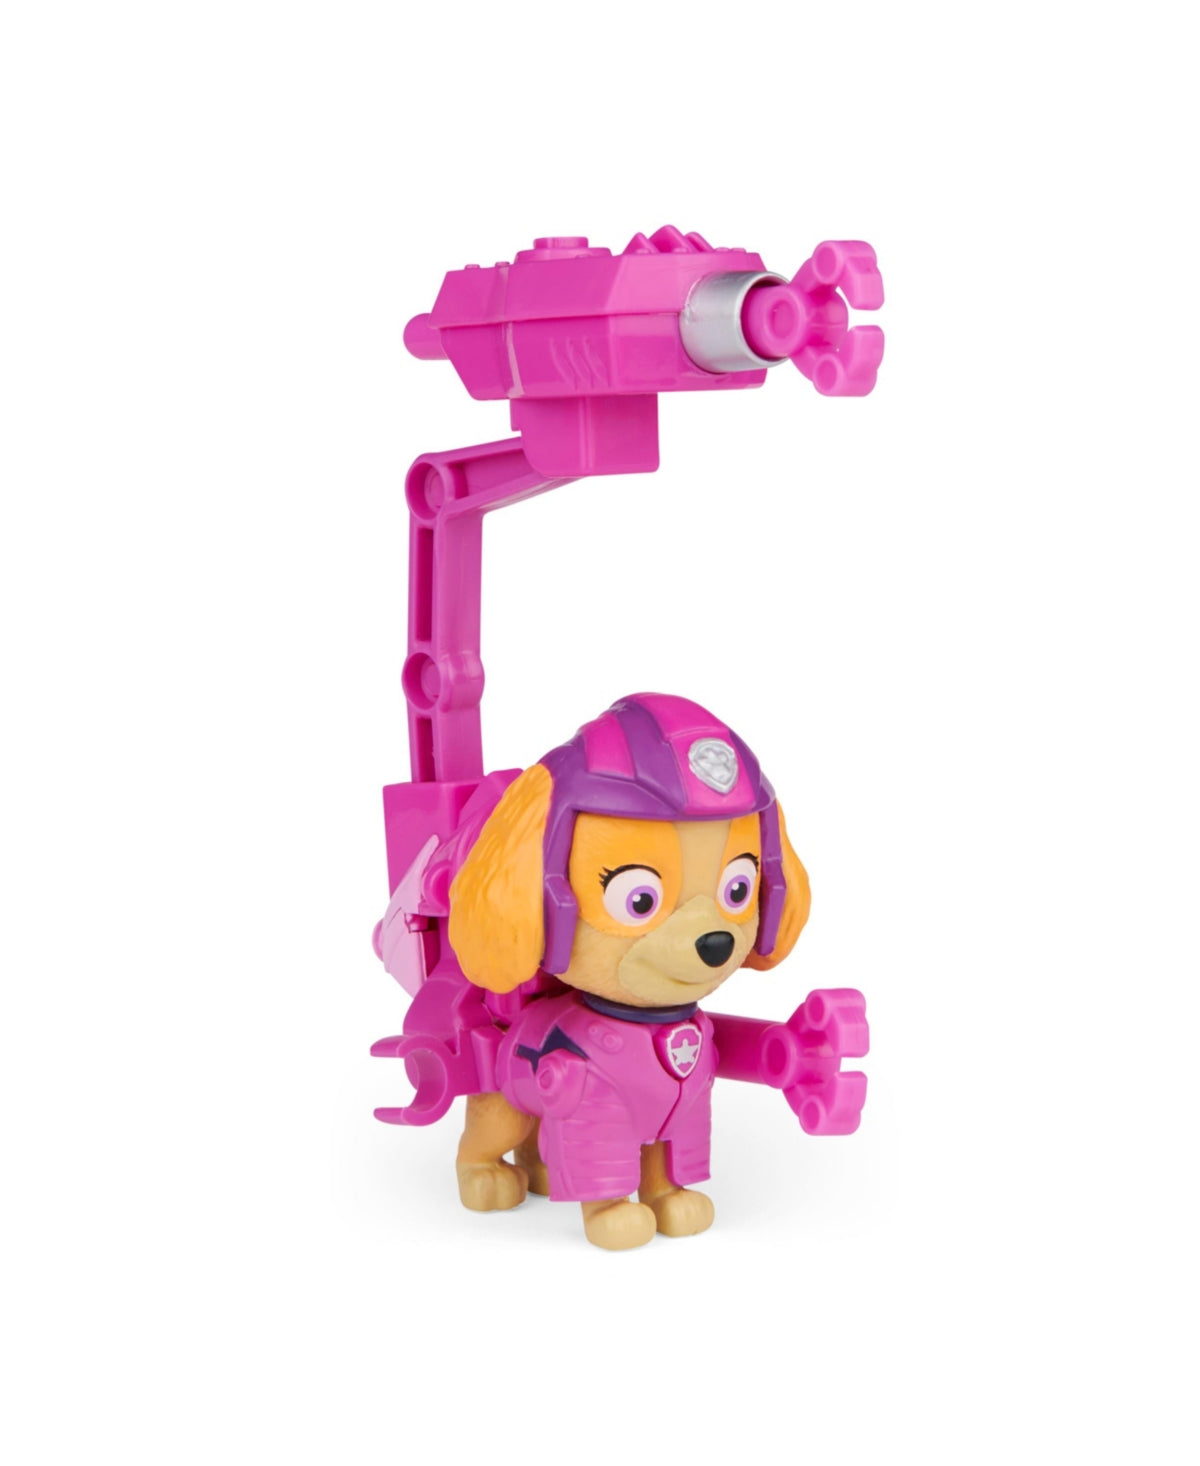 PAW Patrol Skye Action Figure with Clip-on Backpack and Projectiles